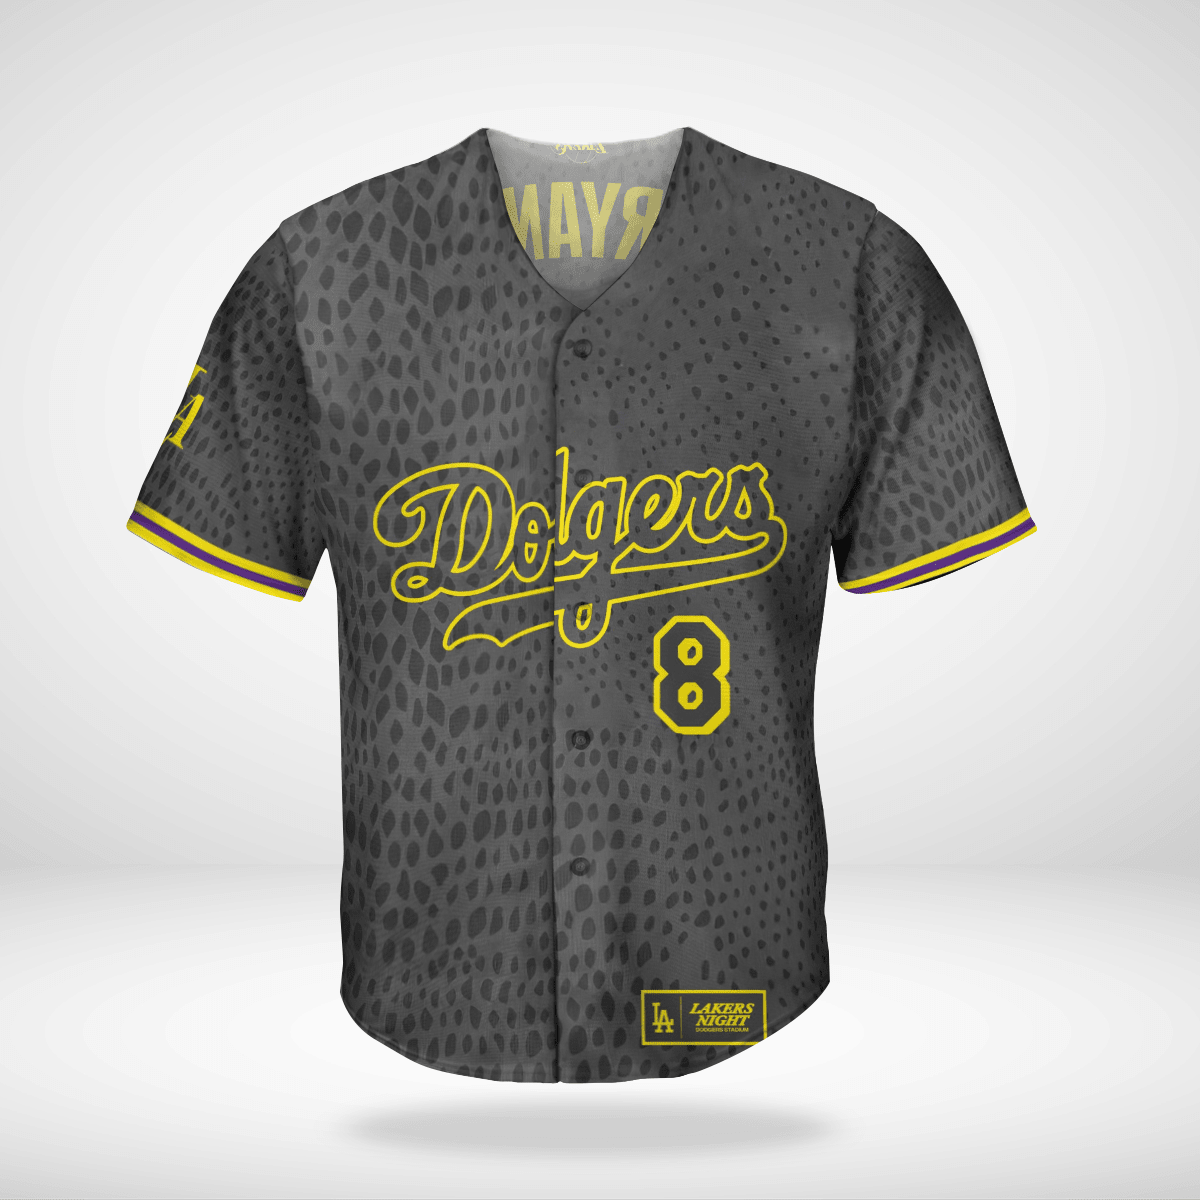 LA Dodgers to honor Kobe Bryant with exclusive jersey giveaway on